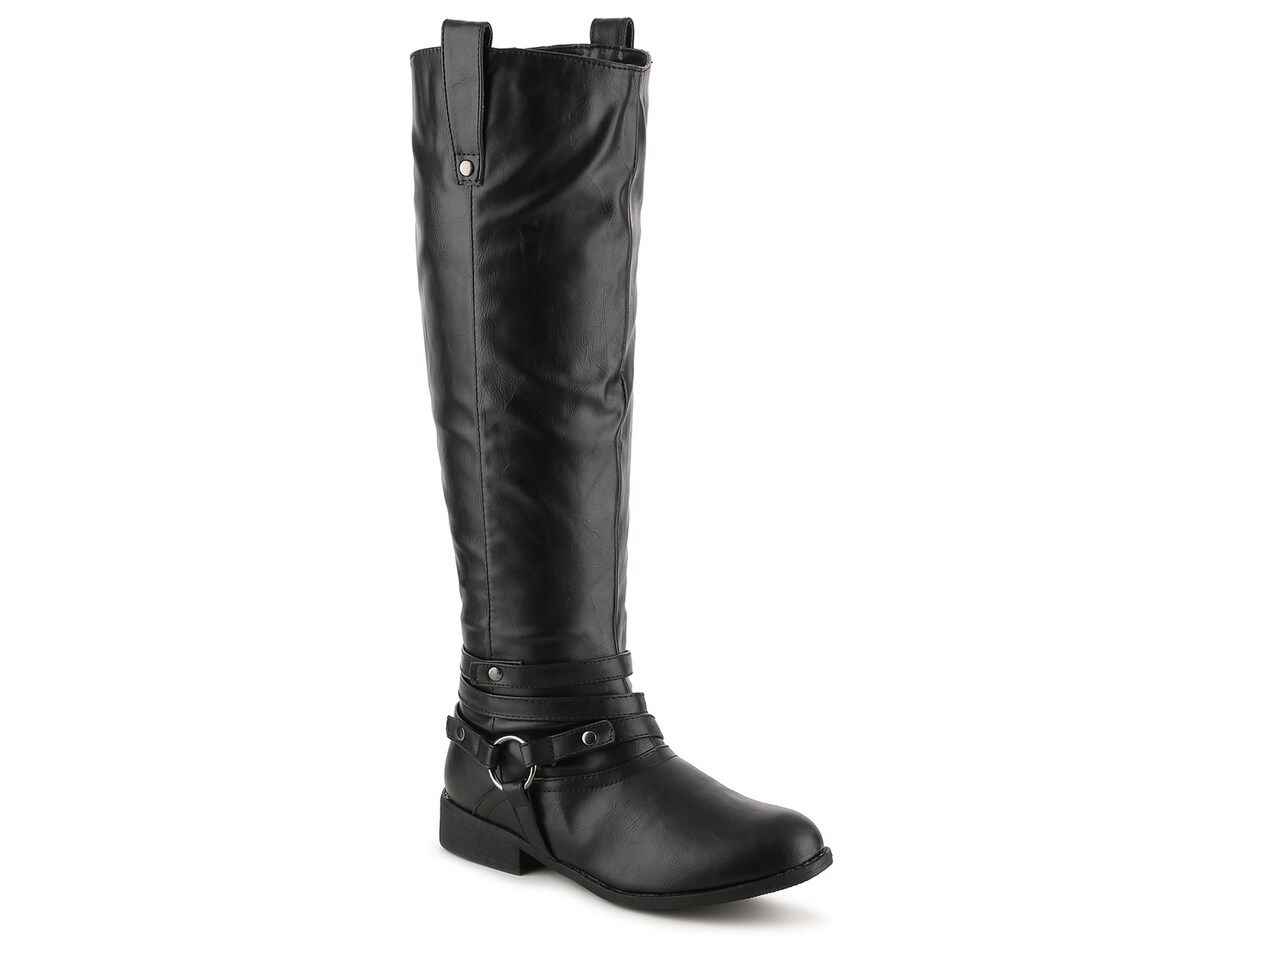 Journee Collection Walla Riding Boot | DSW